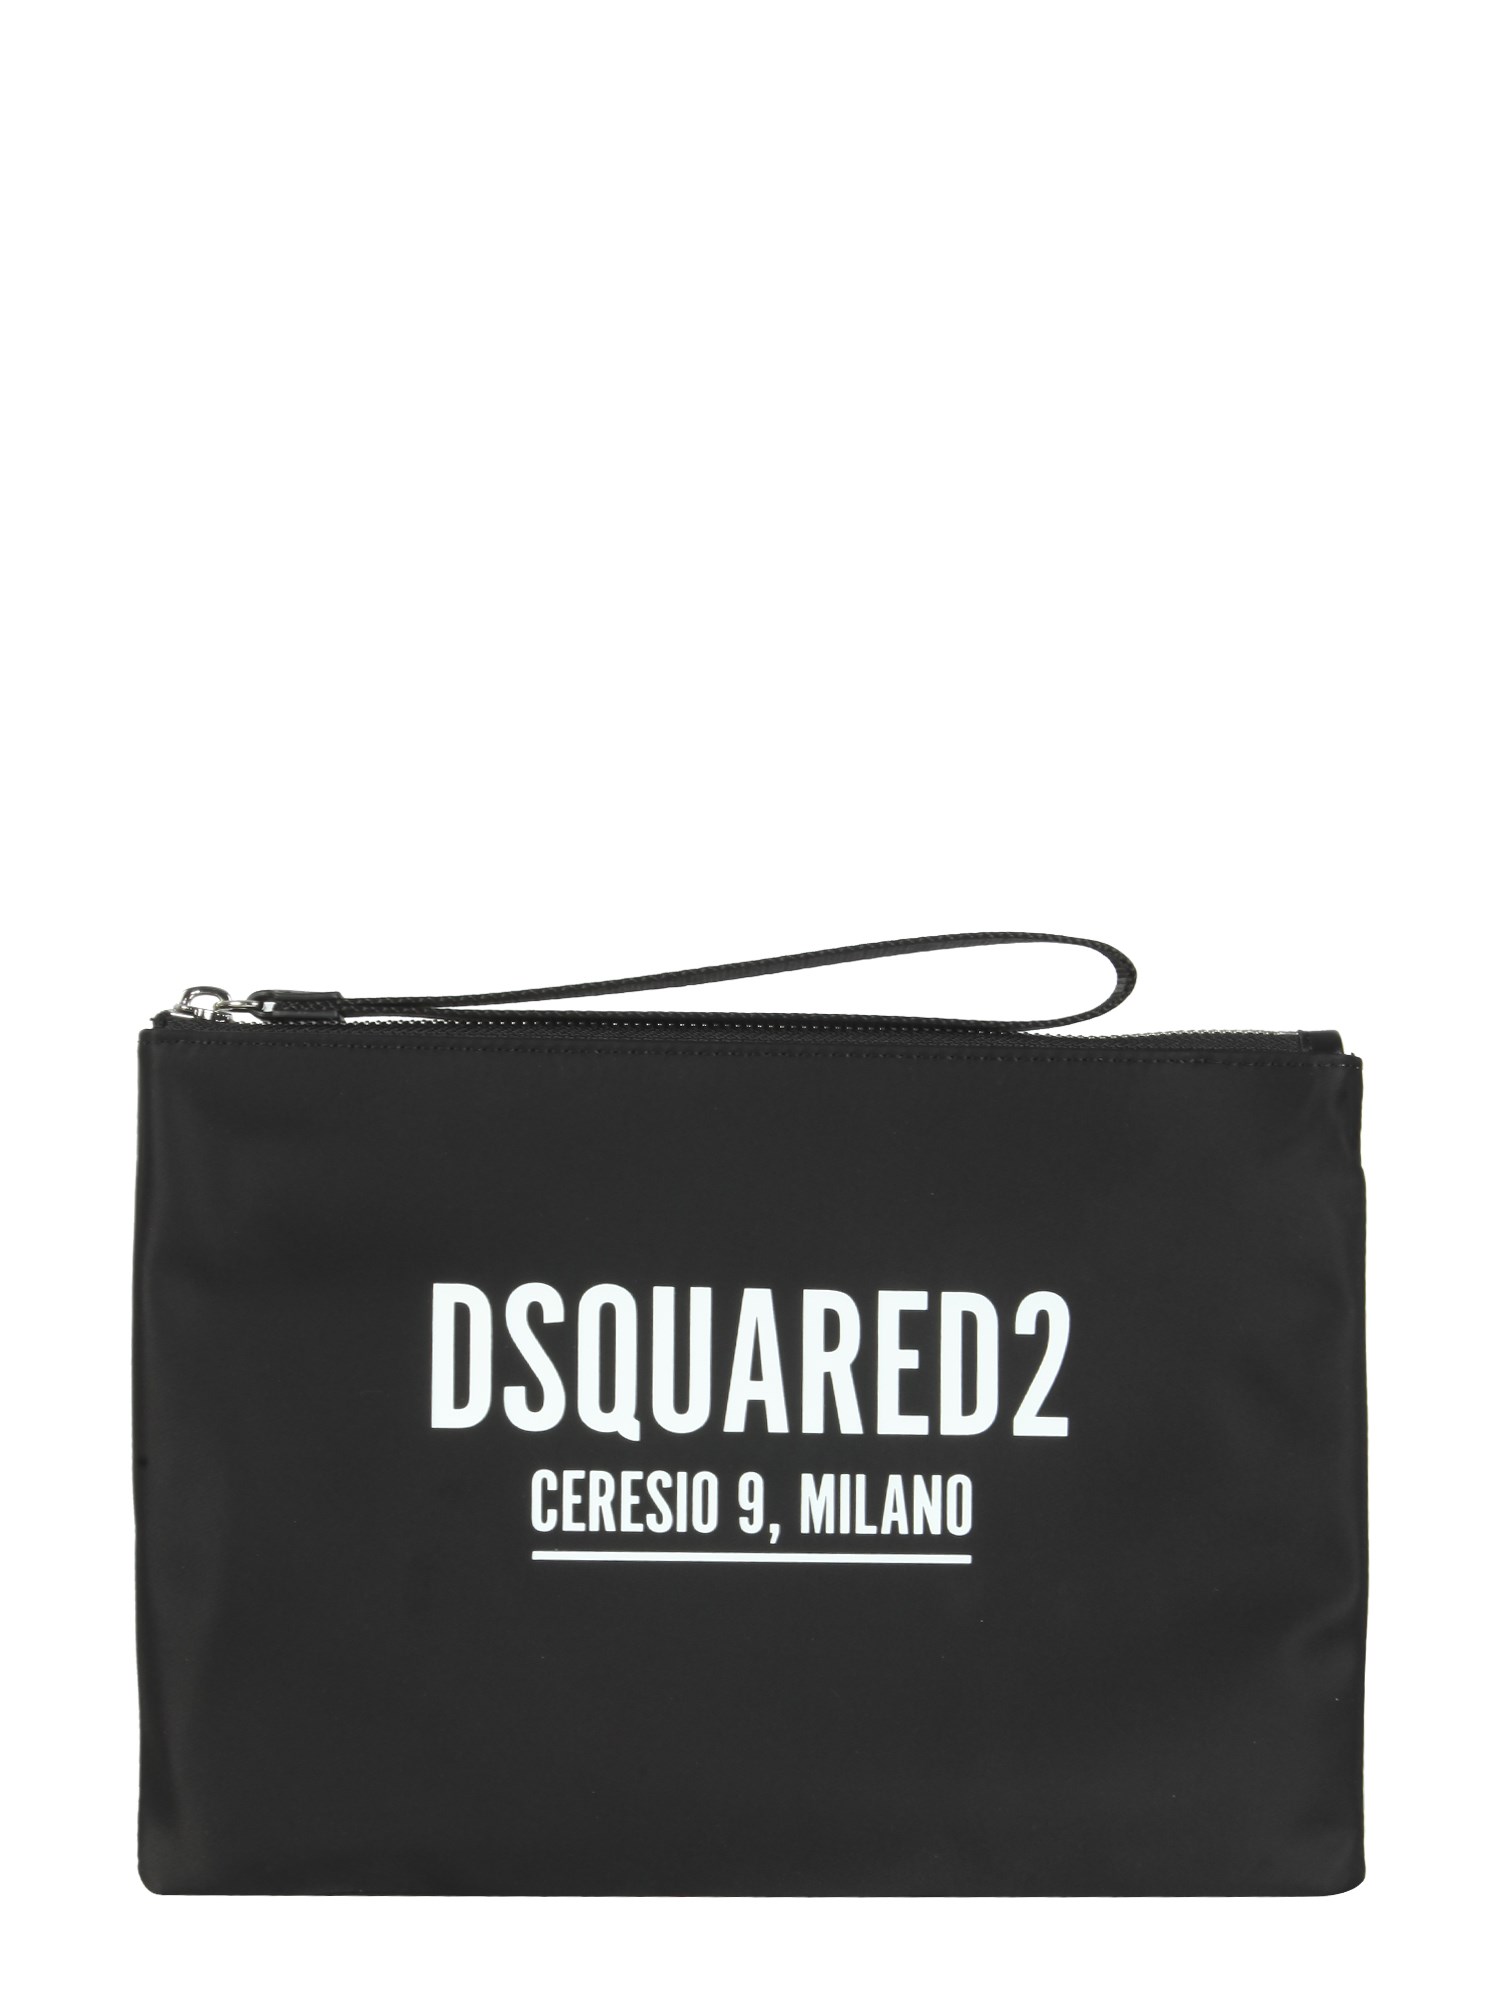 dsquared pouch with ceresio logo print 9